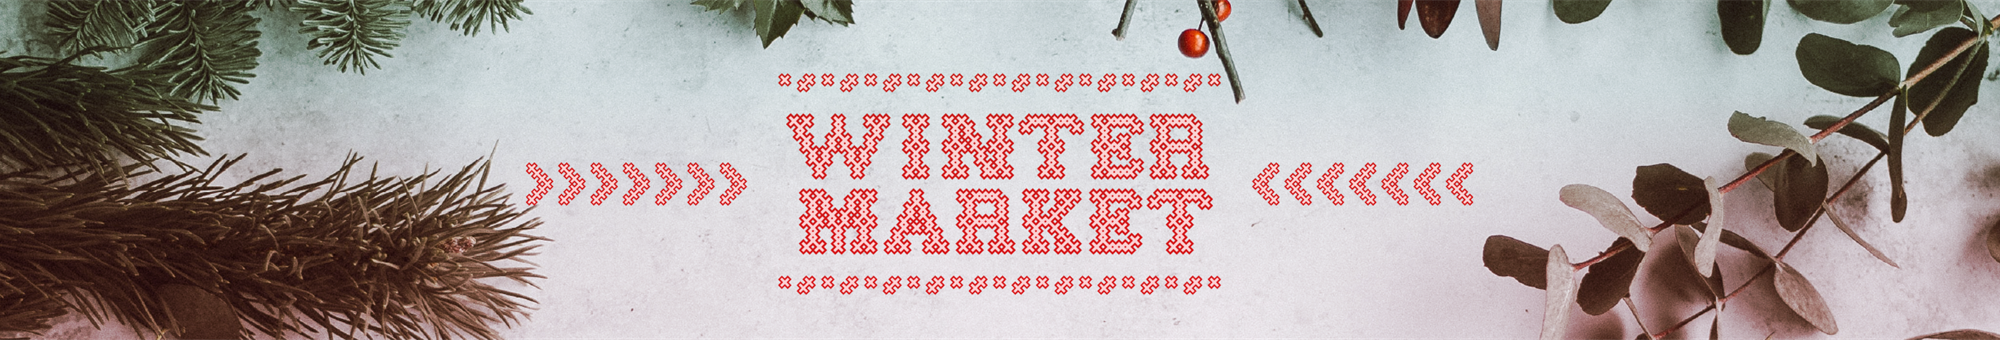 Join us on your campus for our Annual Winter Markets. Spread some festive cheer and support locally, stall sign-up open to students, staff, alumni and public.